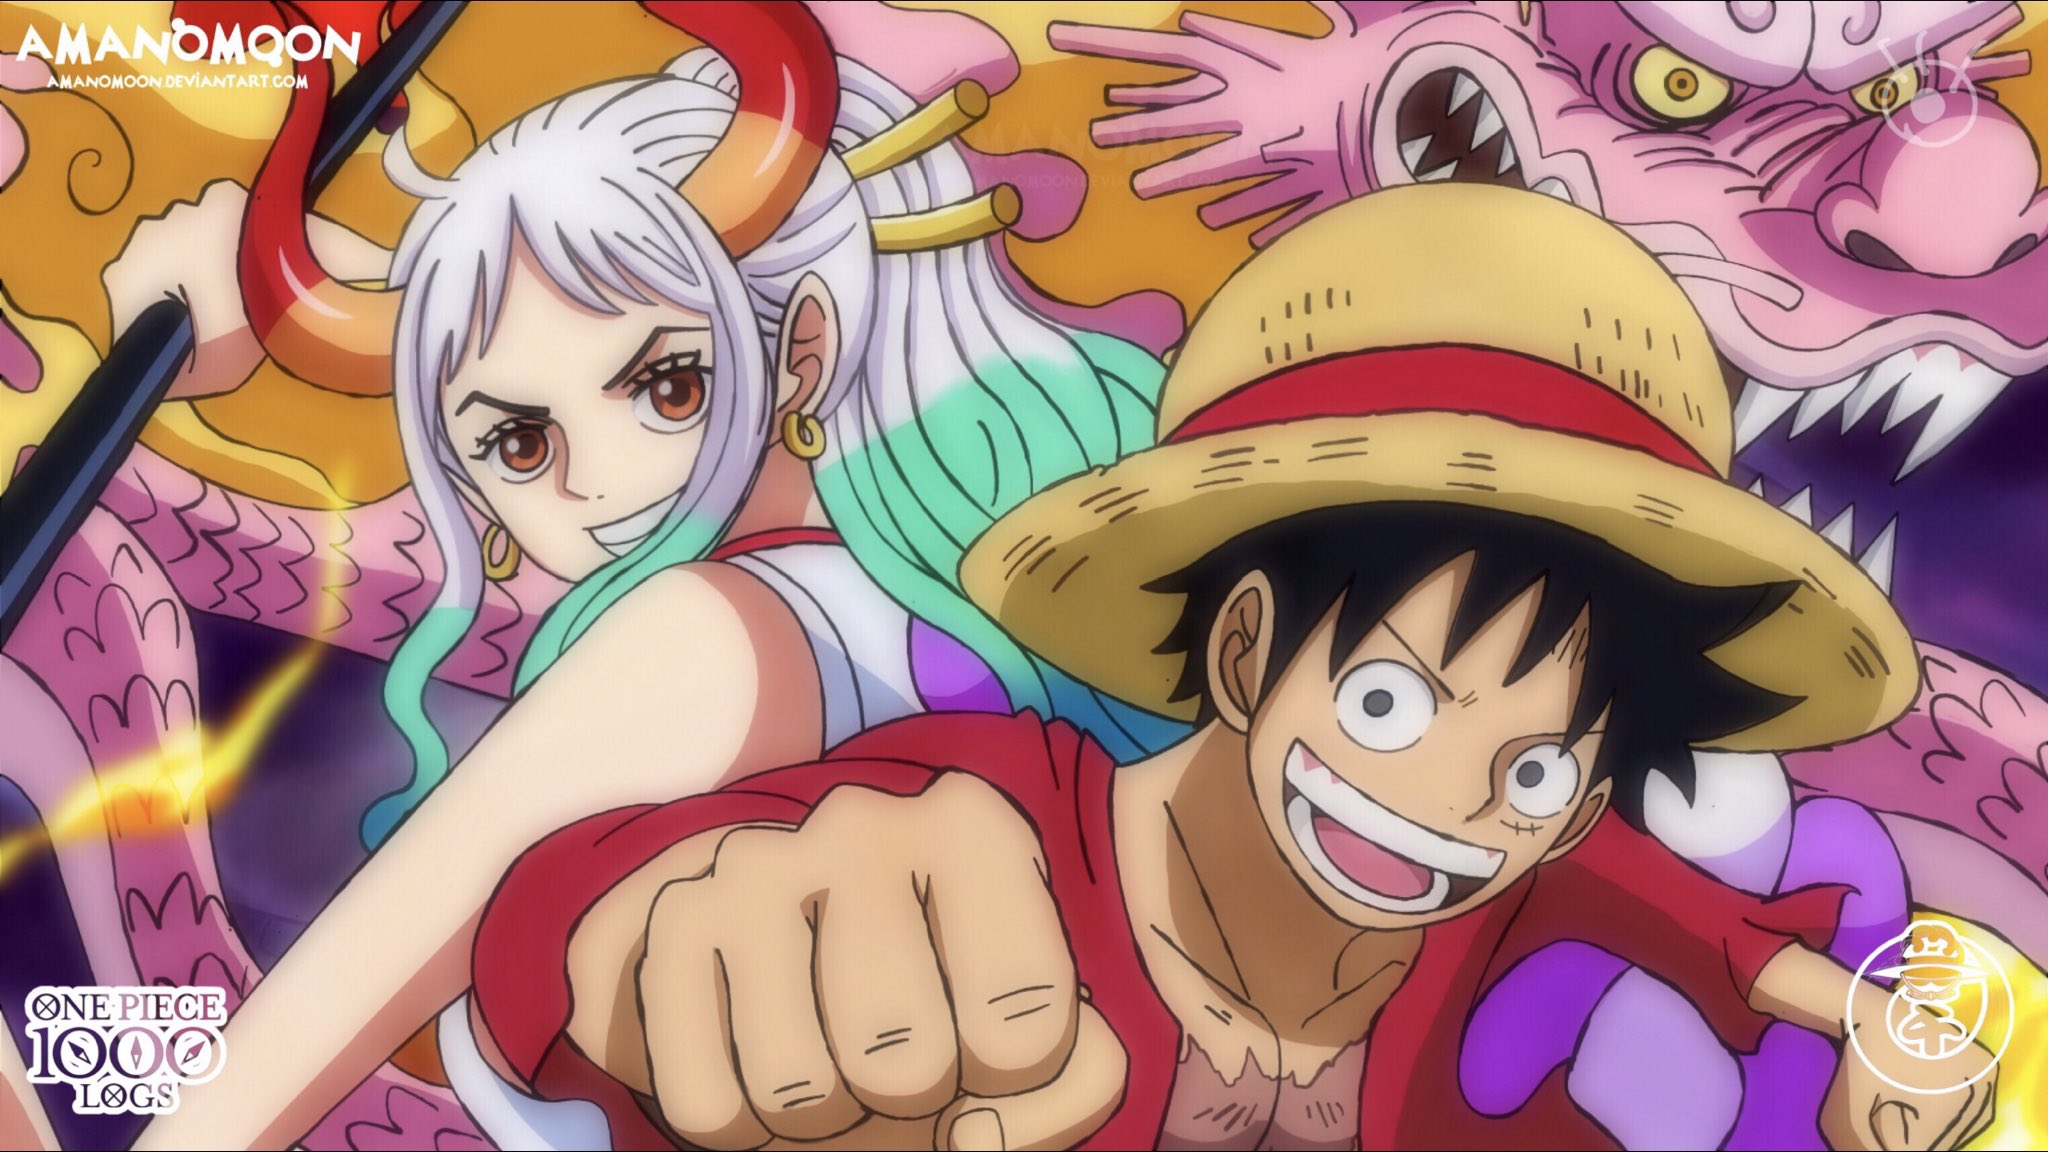 ONE PIECE, Episode 1000 Special Opening